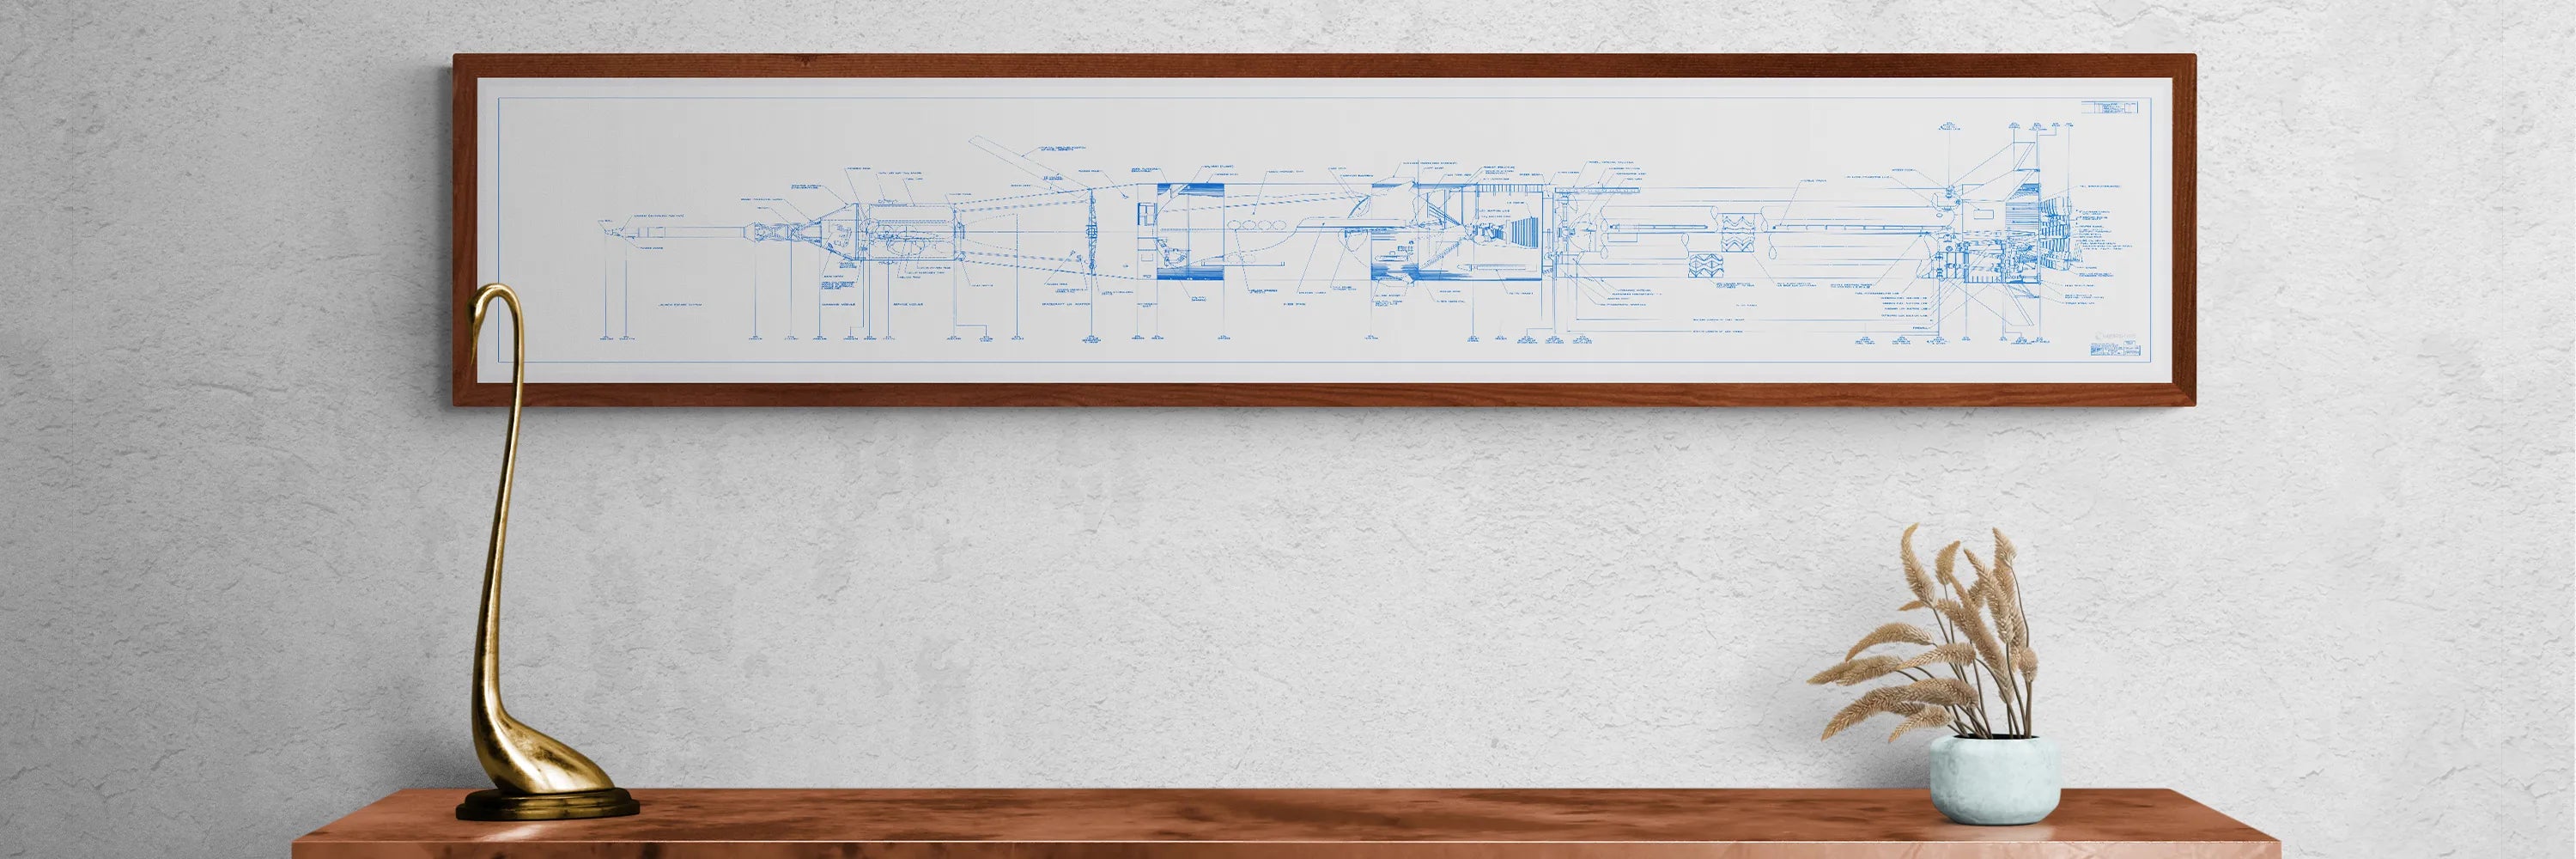 Apollo Saturn 1B Blueprint | NASA posters | Technical blueprint Diagram | A framed blueprint poster of the Saturn 1B rocket hangs on a light-colored wall above a wooden table. The detailed technical drawing is set against a white background with blue lines. On the table are a modern brass lamp with a curved design and a small potted plant with dried grass.